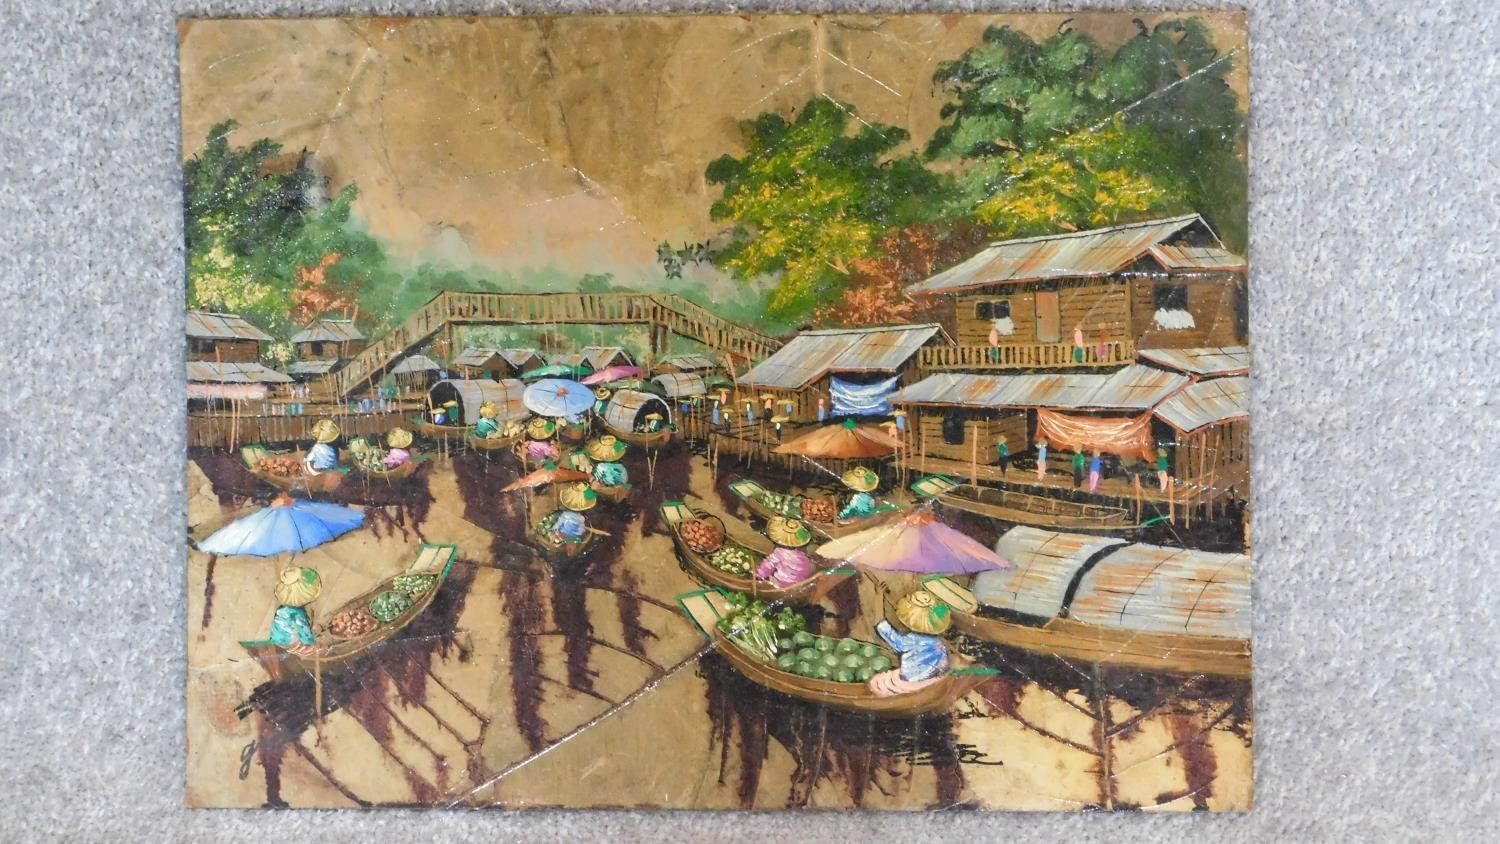 An oil painting on panel overlaid by tobacco leaves depicting a trading post on a lake. 30x40cm